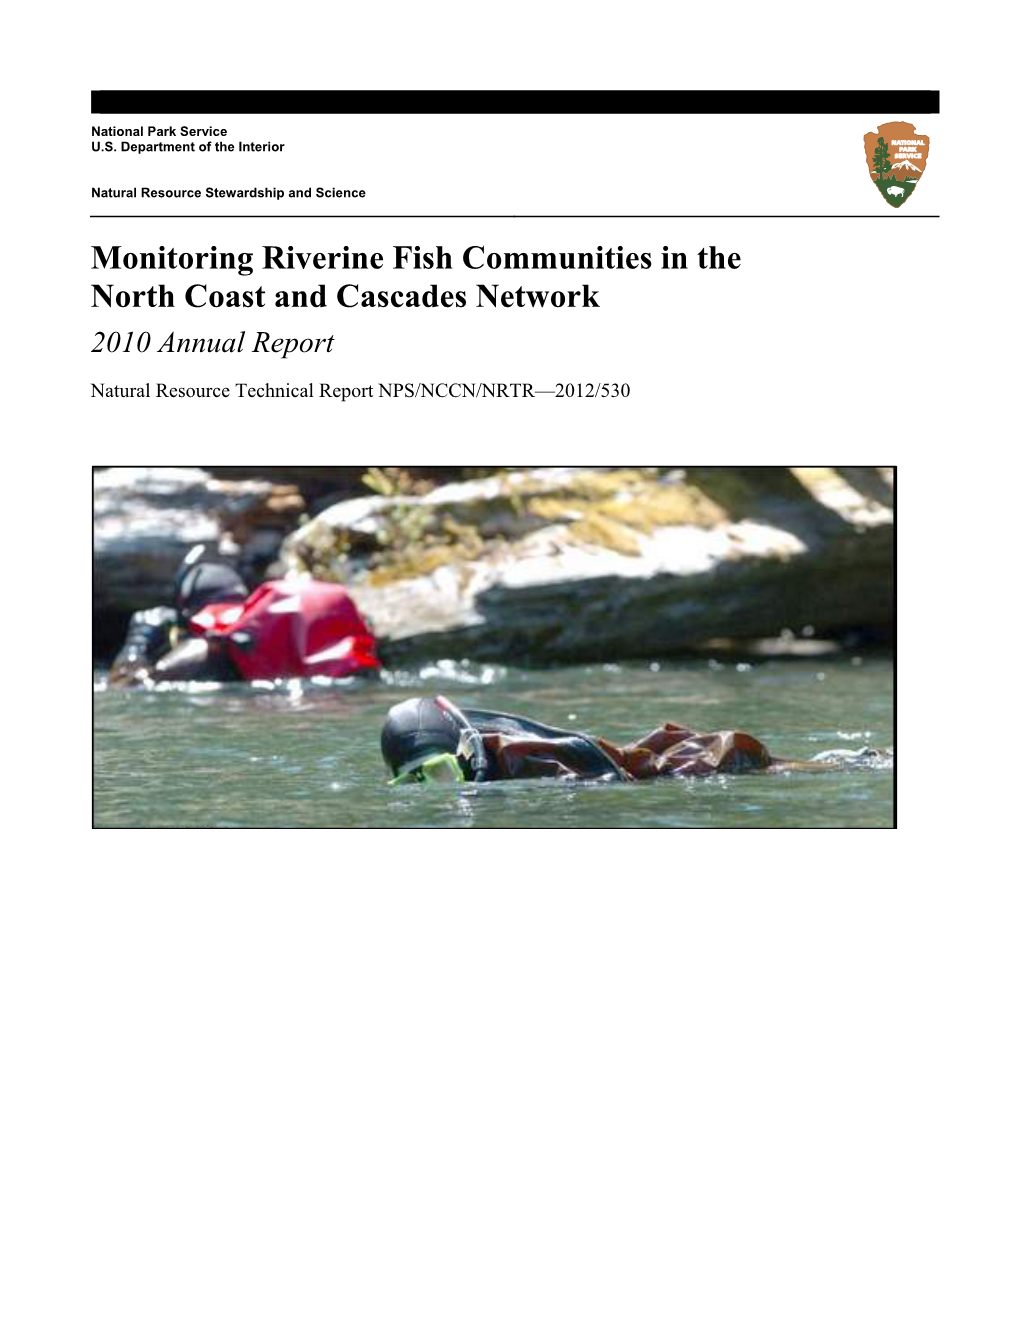 Monitoring Riverine Fish Communities in the North Coast and Cascades Network 2010 Annual Report